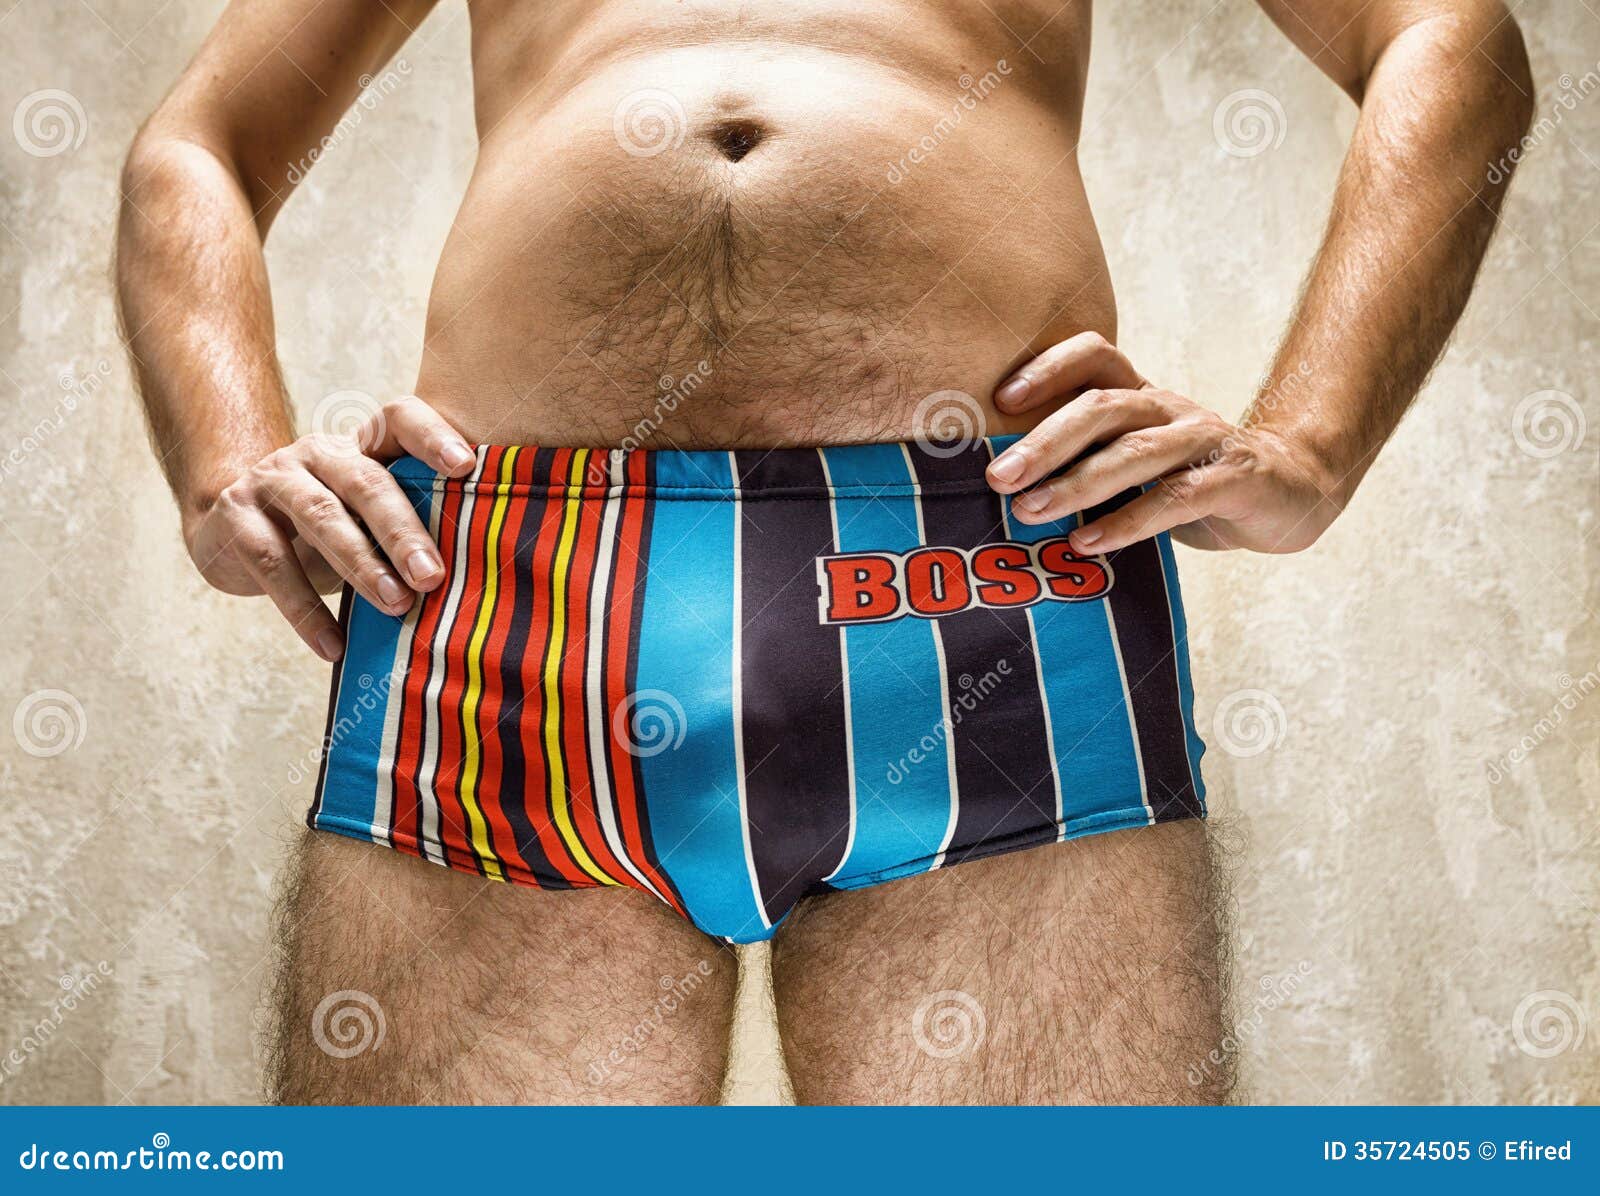 Macho Man in Funny Swimming Trunks Stock Image - Image of pride, handsome:  35724505